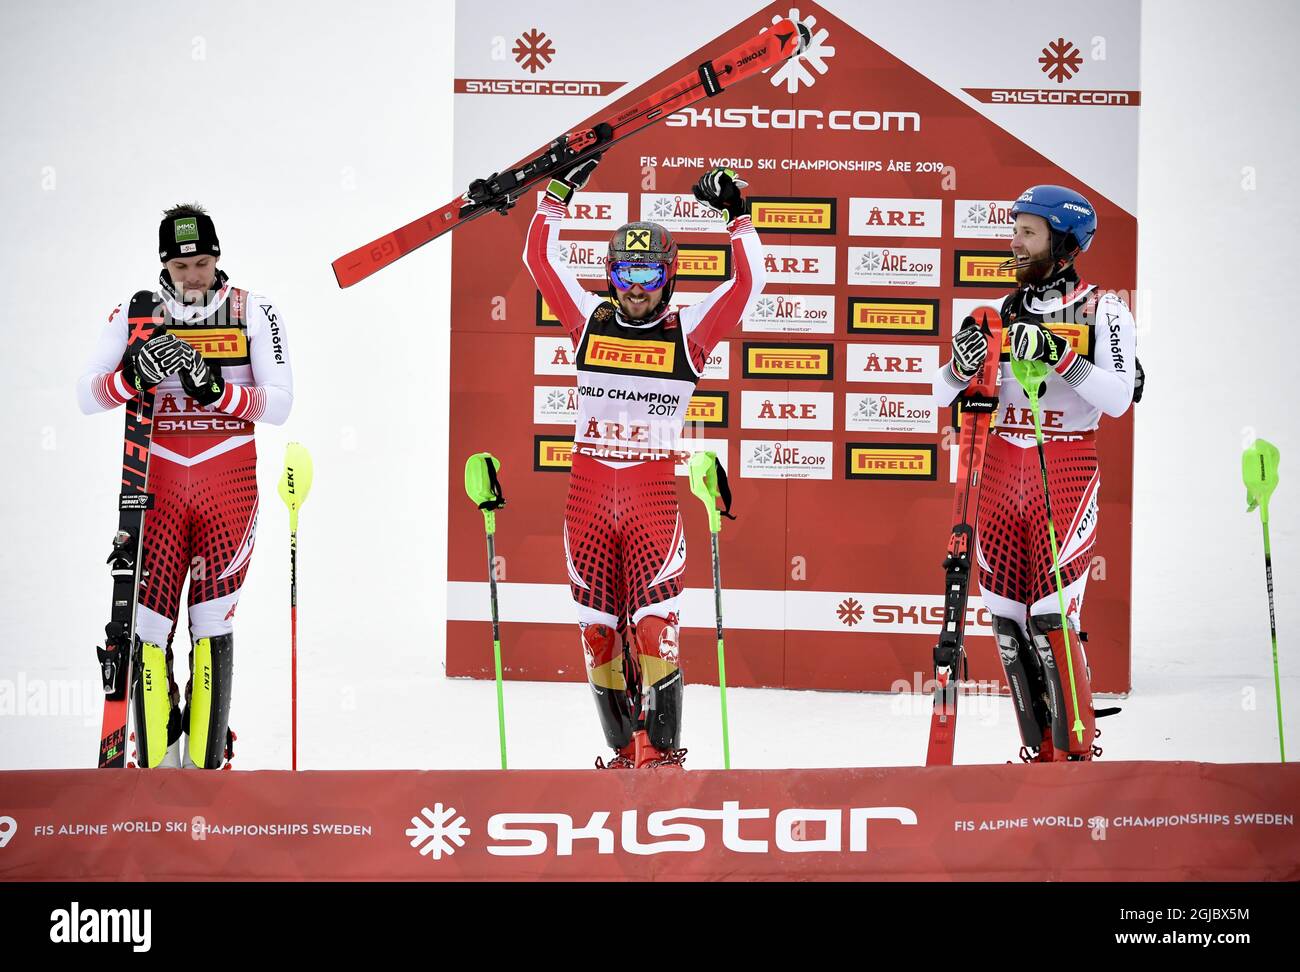 Ã…RE 2019-02-17 Left to right: Michael Matt AUT's second place, Marcel Hirscher AUT's first place and Marco Schwarz AUT's third place after the second race at the Alpine Ski World Championships in Are, Sweden, Feb.17, 2019 Foto: Pontus Lundahl / TT / kod 10050  Stock Photo